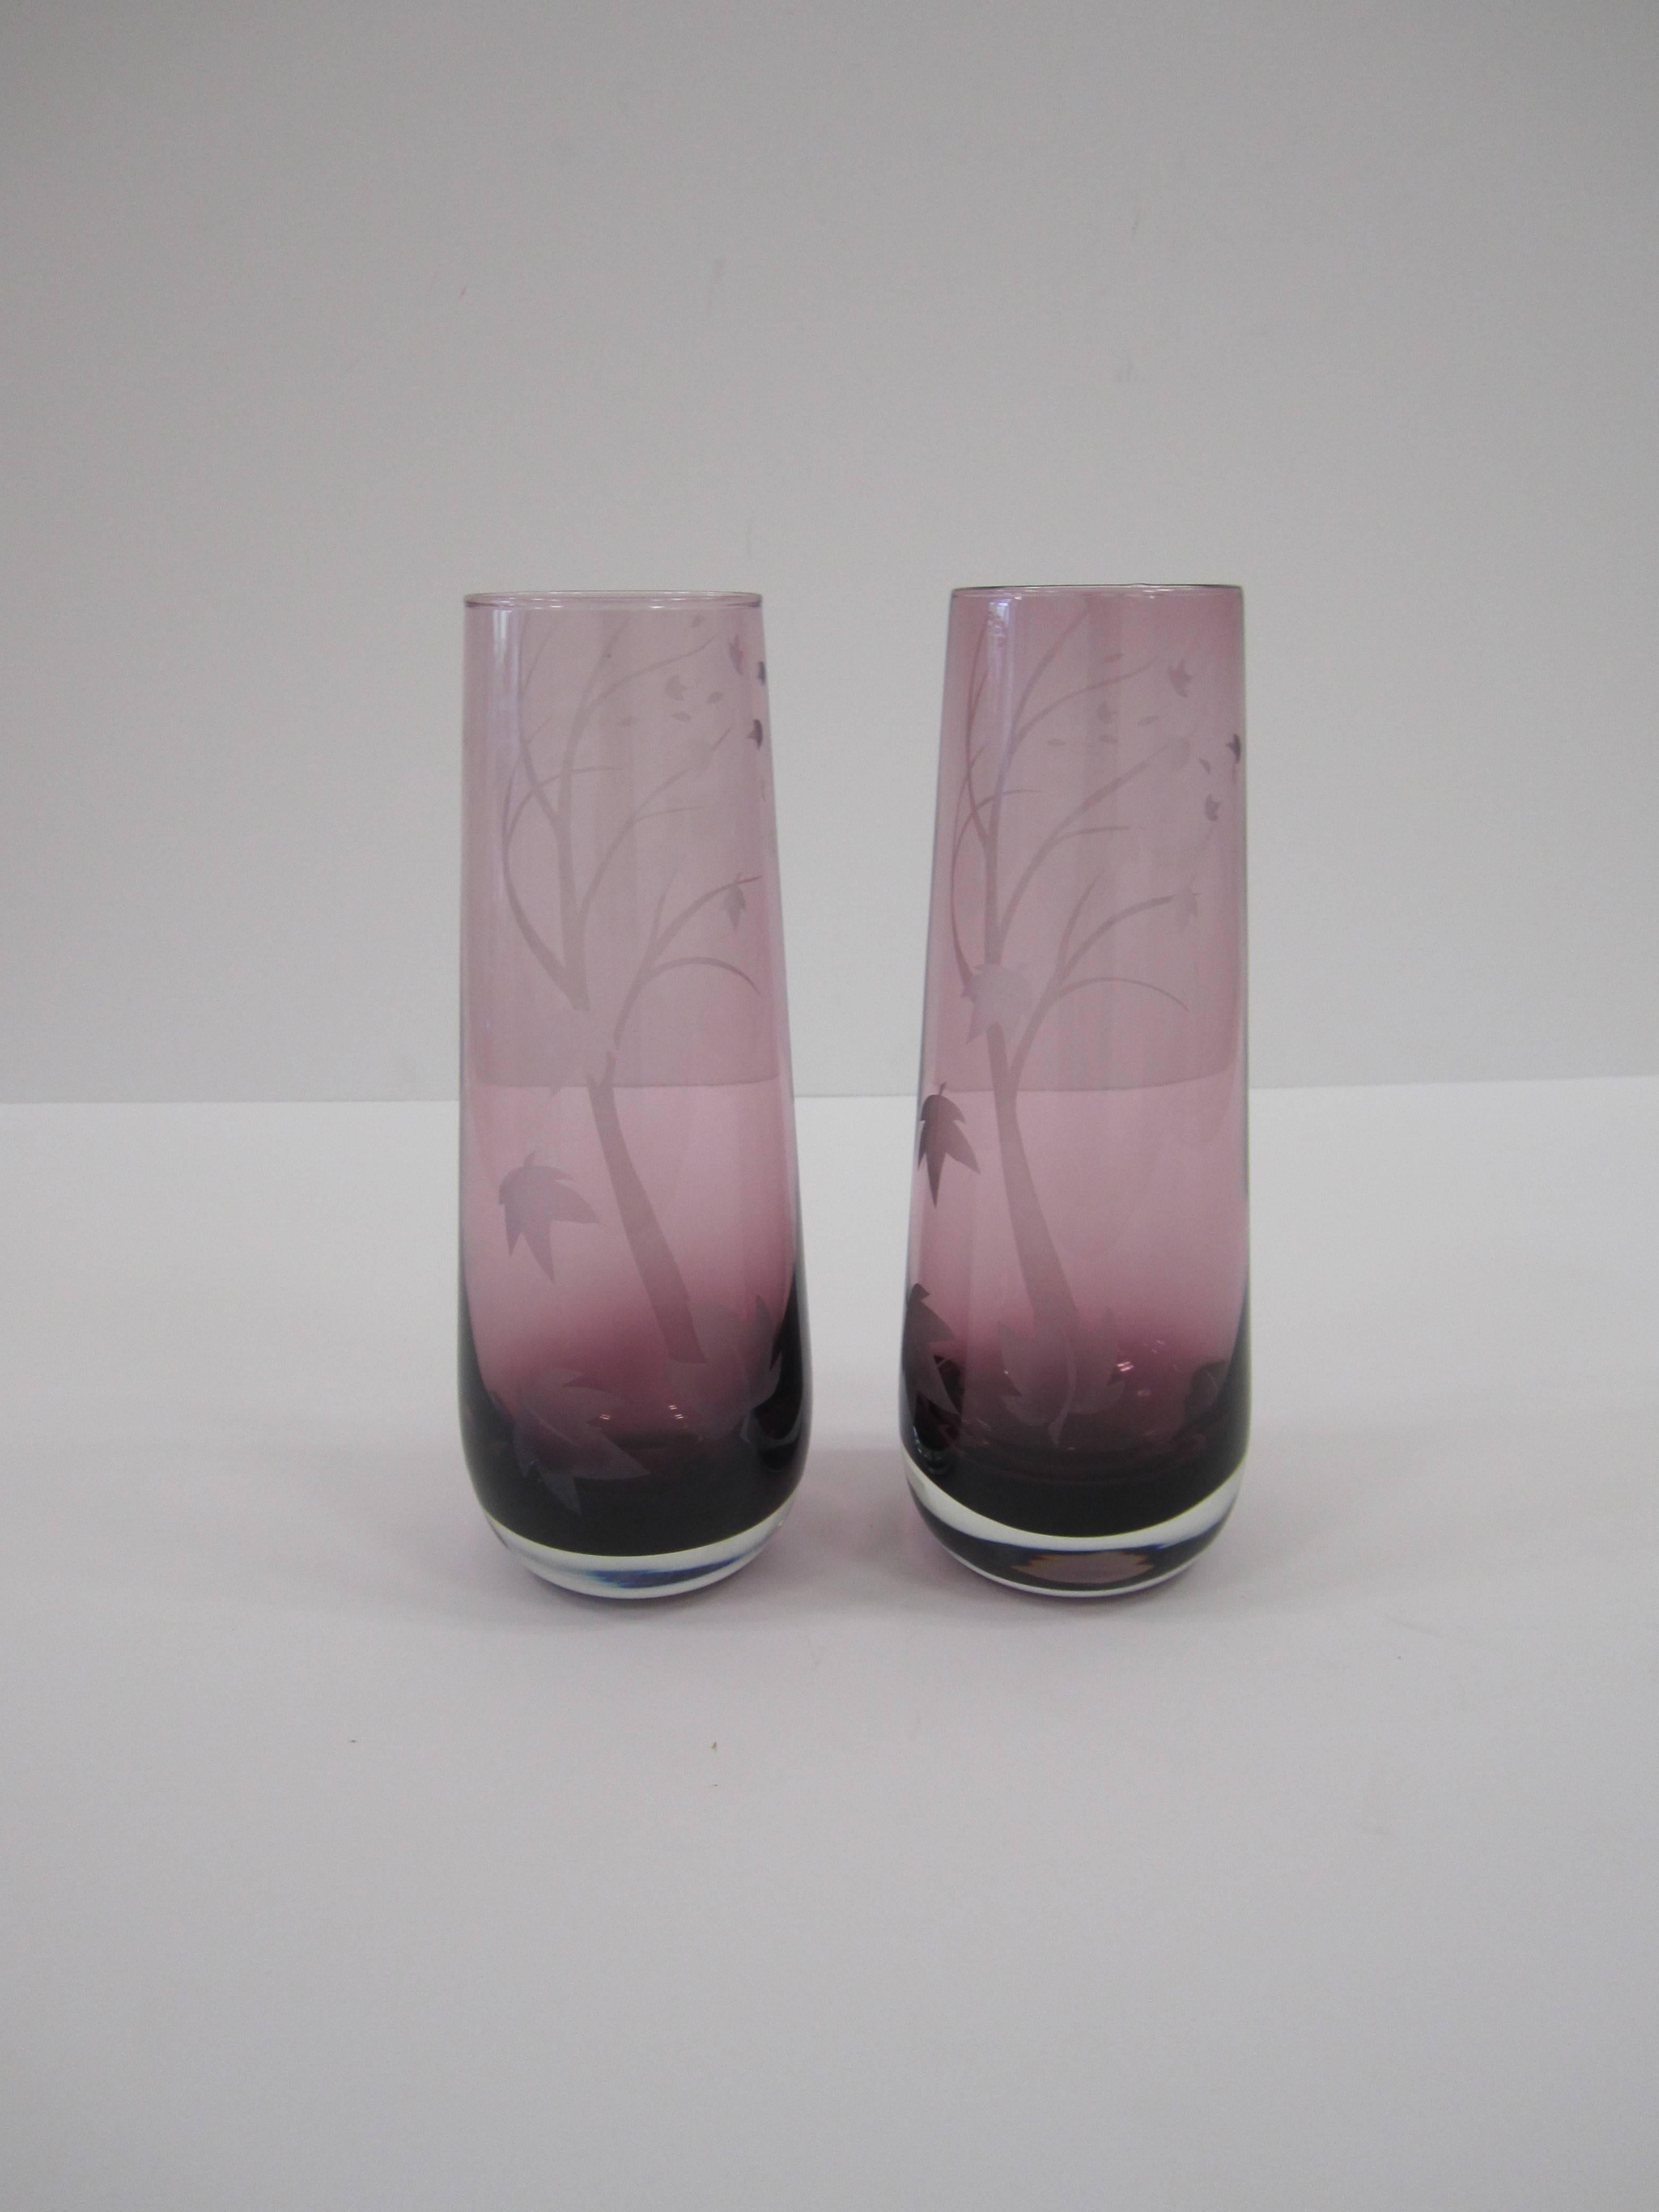 A pair of beautiful and substantial amethyst purple signed art glass vases, 1982. Art glass vases have an etched large tree design with free flowing leaves, initialed and signed 'Autumn Leaves 1982' on bottom as show in image #3. 

Measures: 9